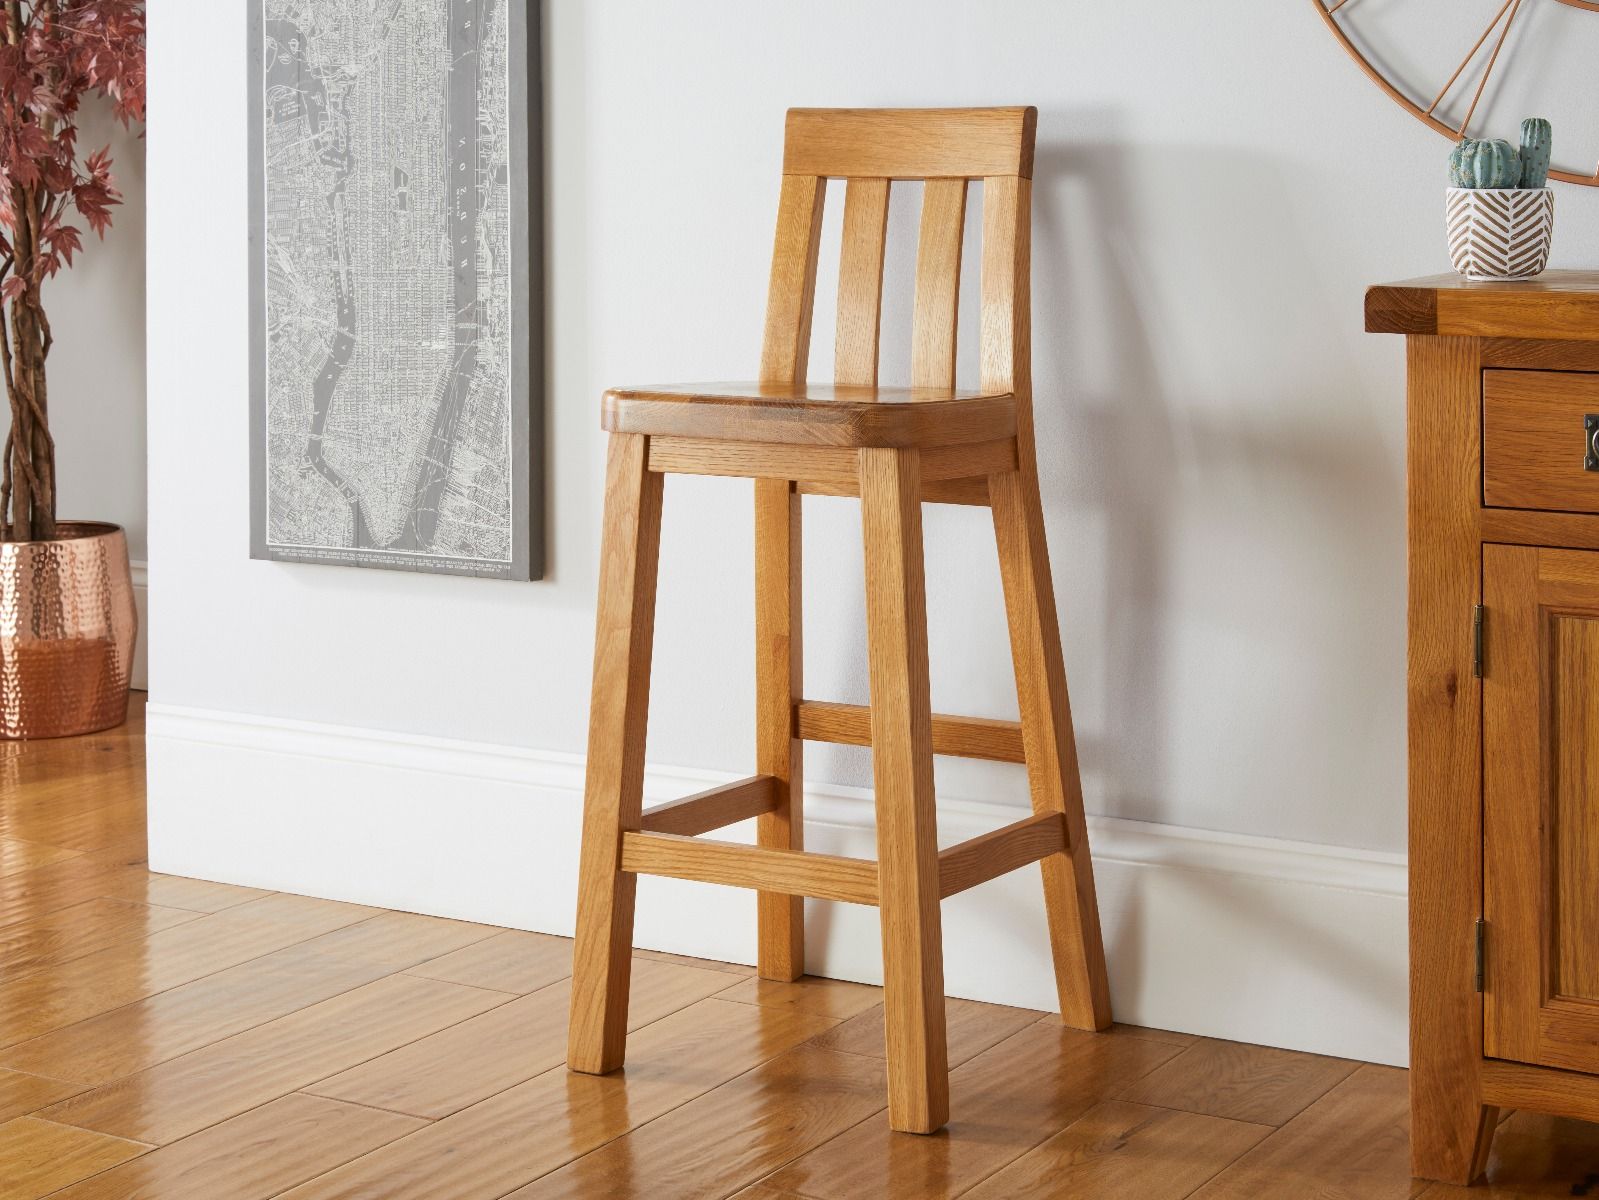 How To Paint Wood Bar Stools